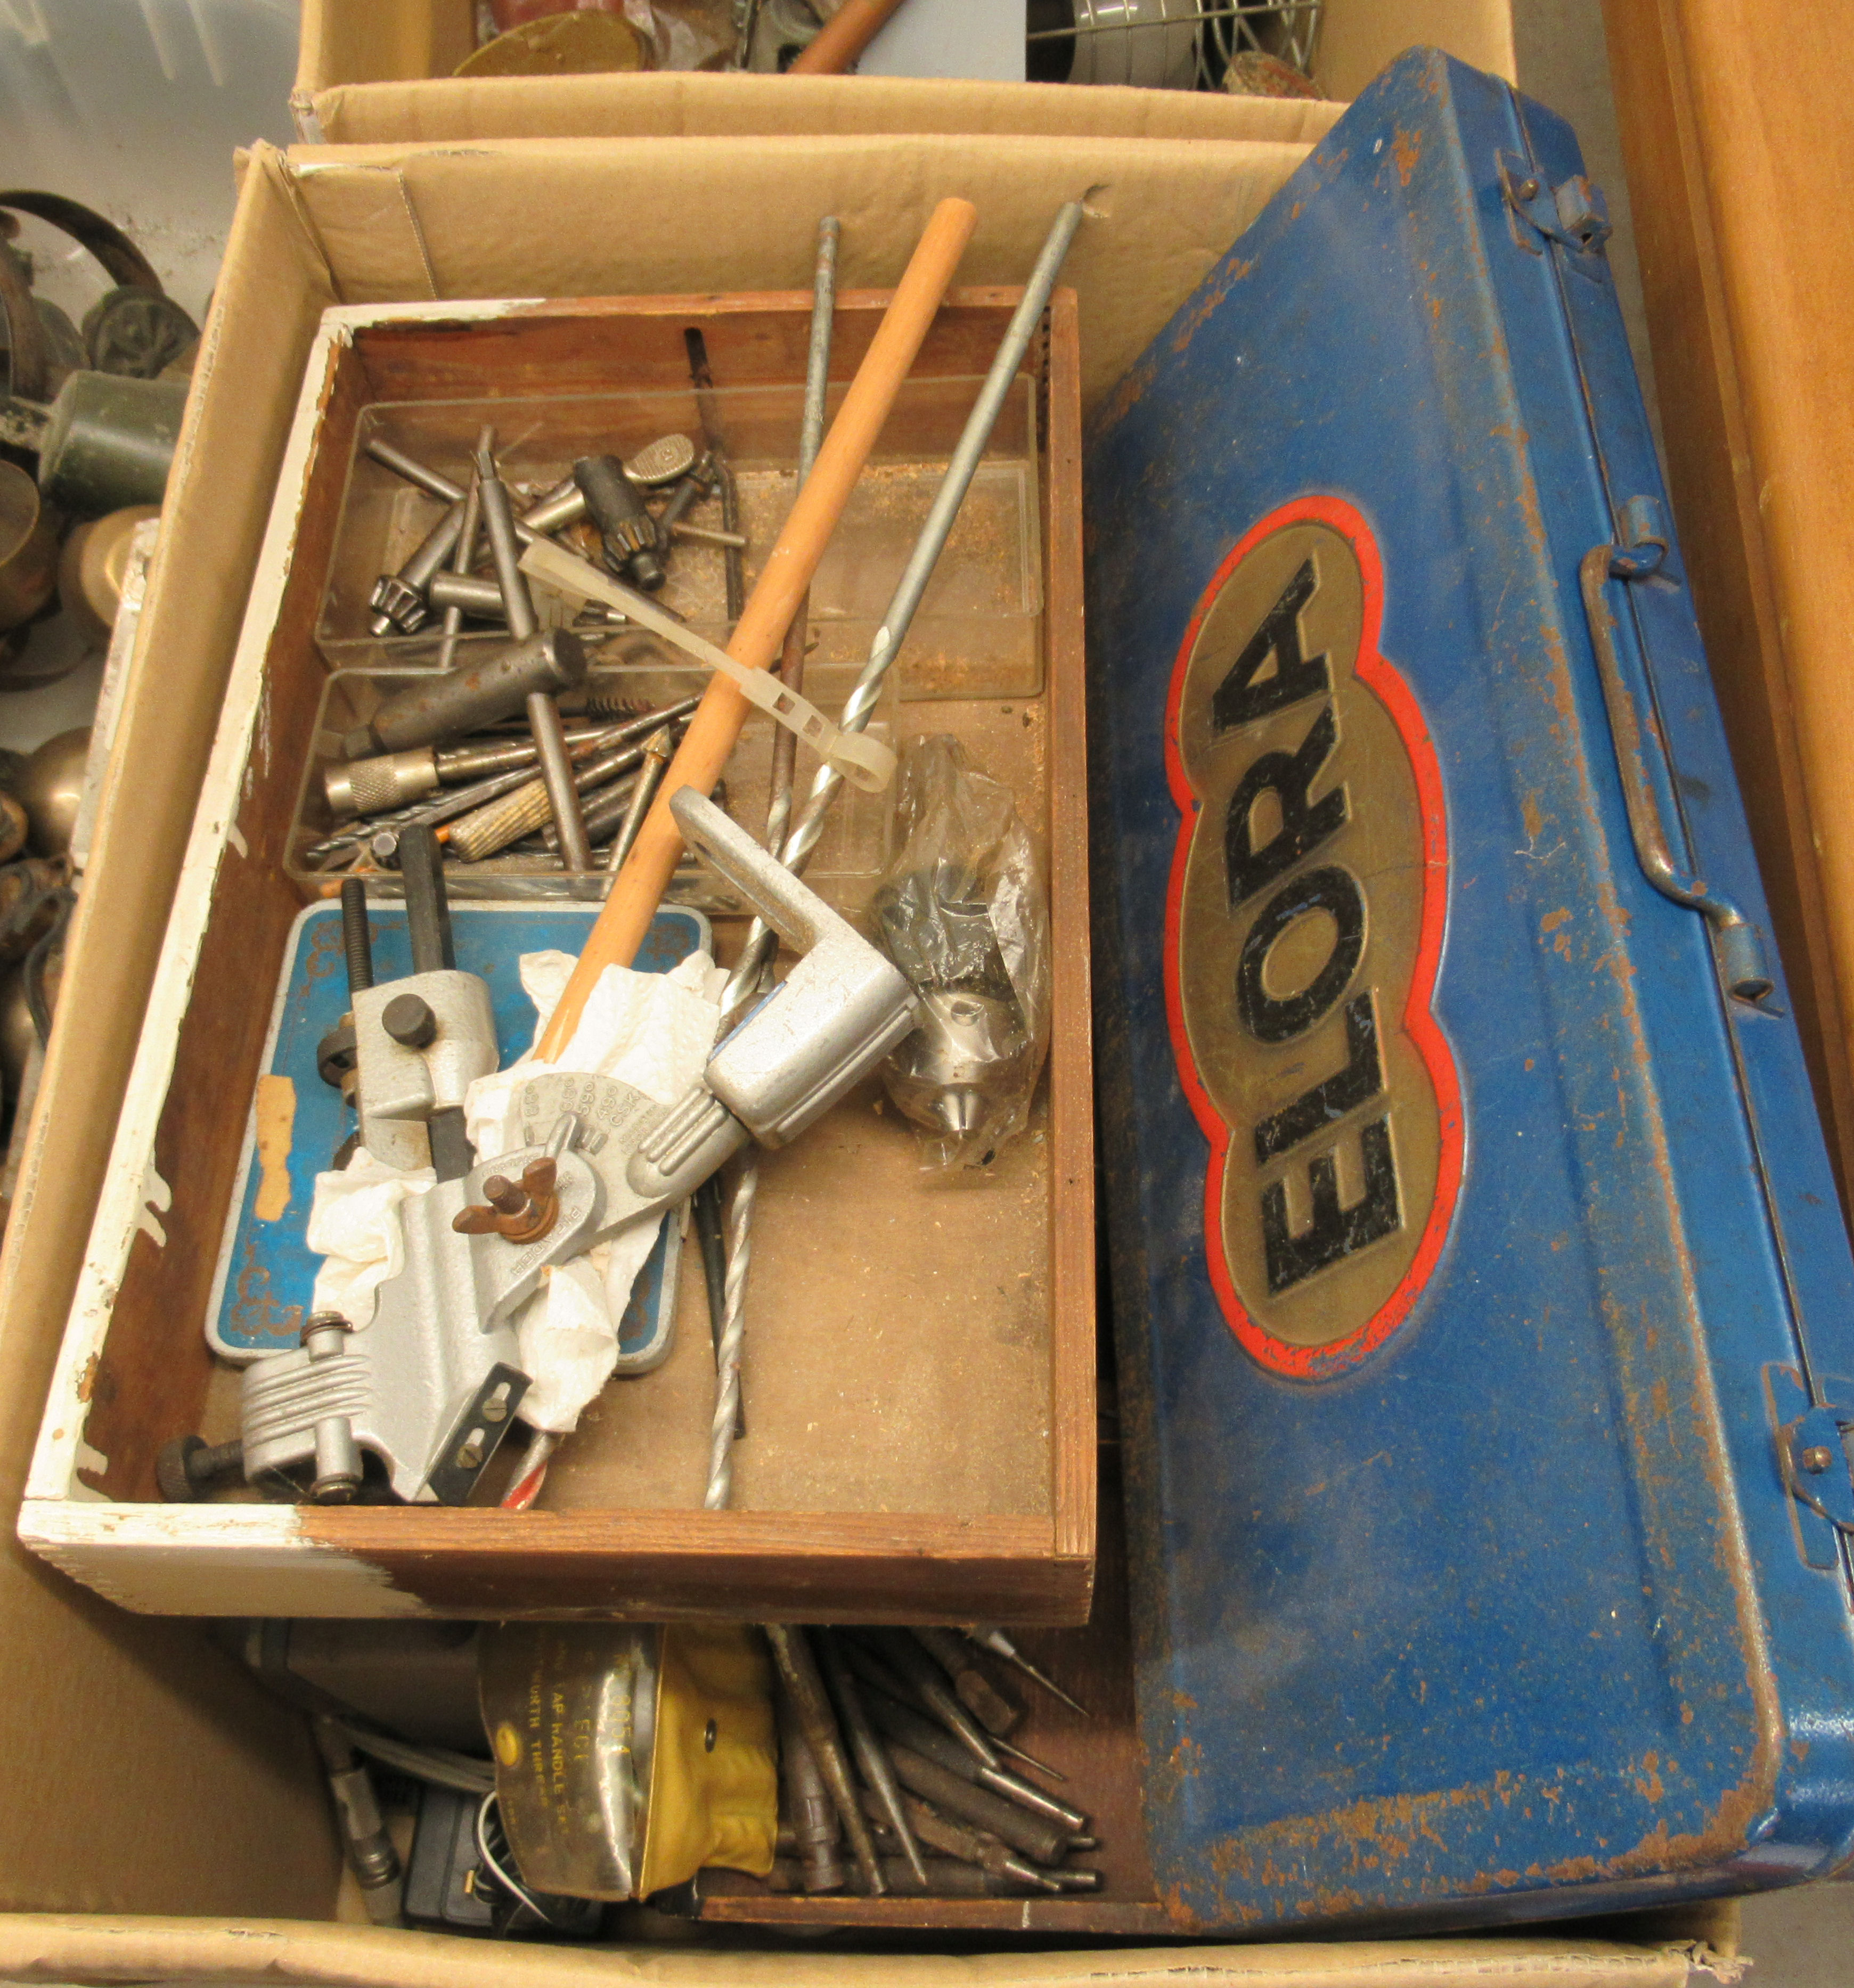 A miscellany of handtools, drill bits, - Image 2 of 7